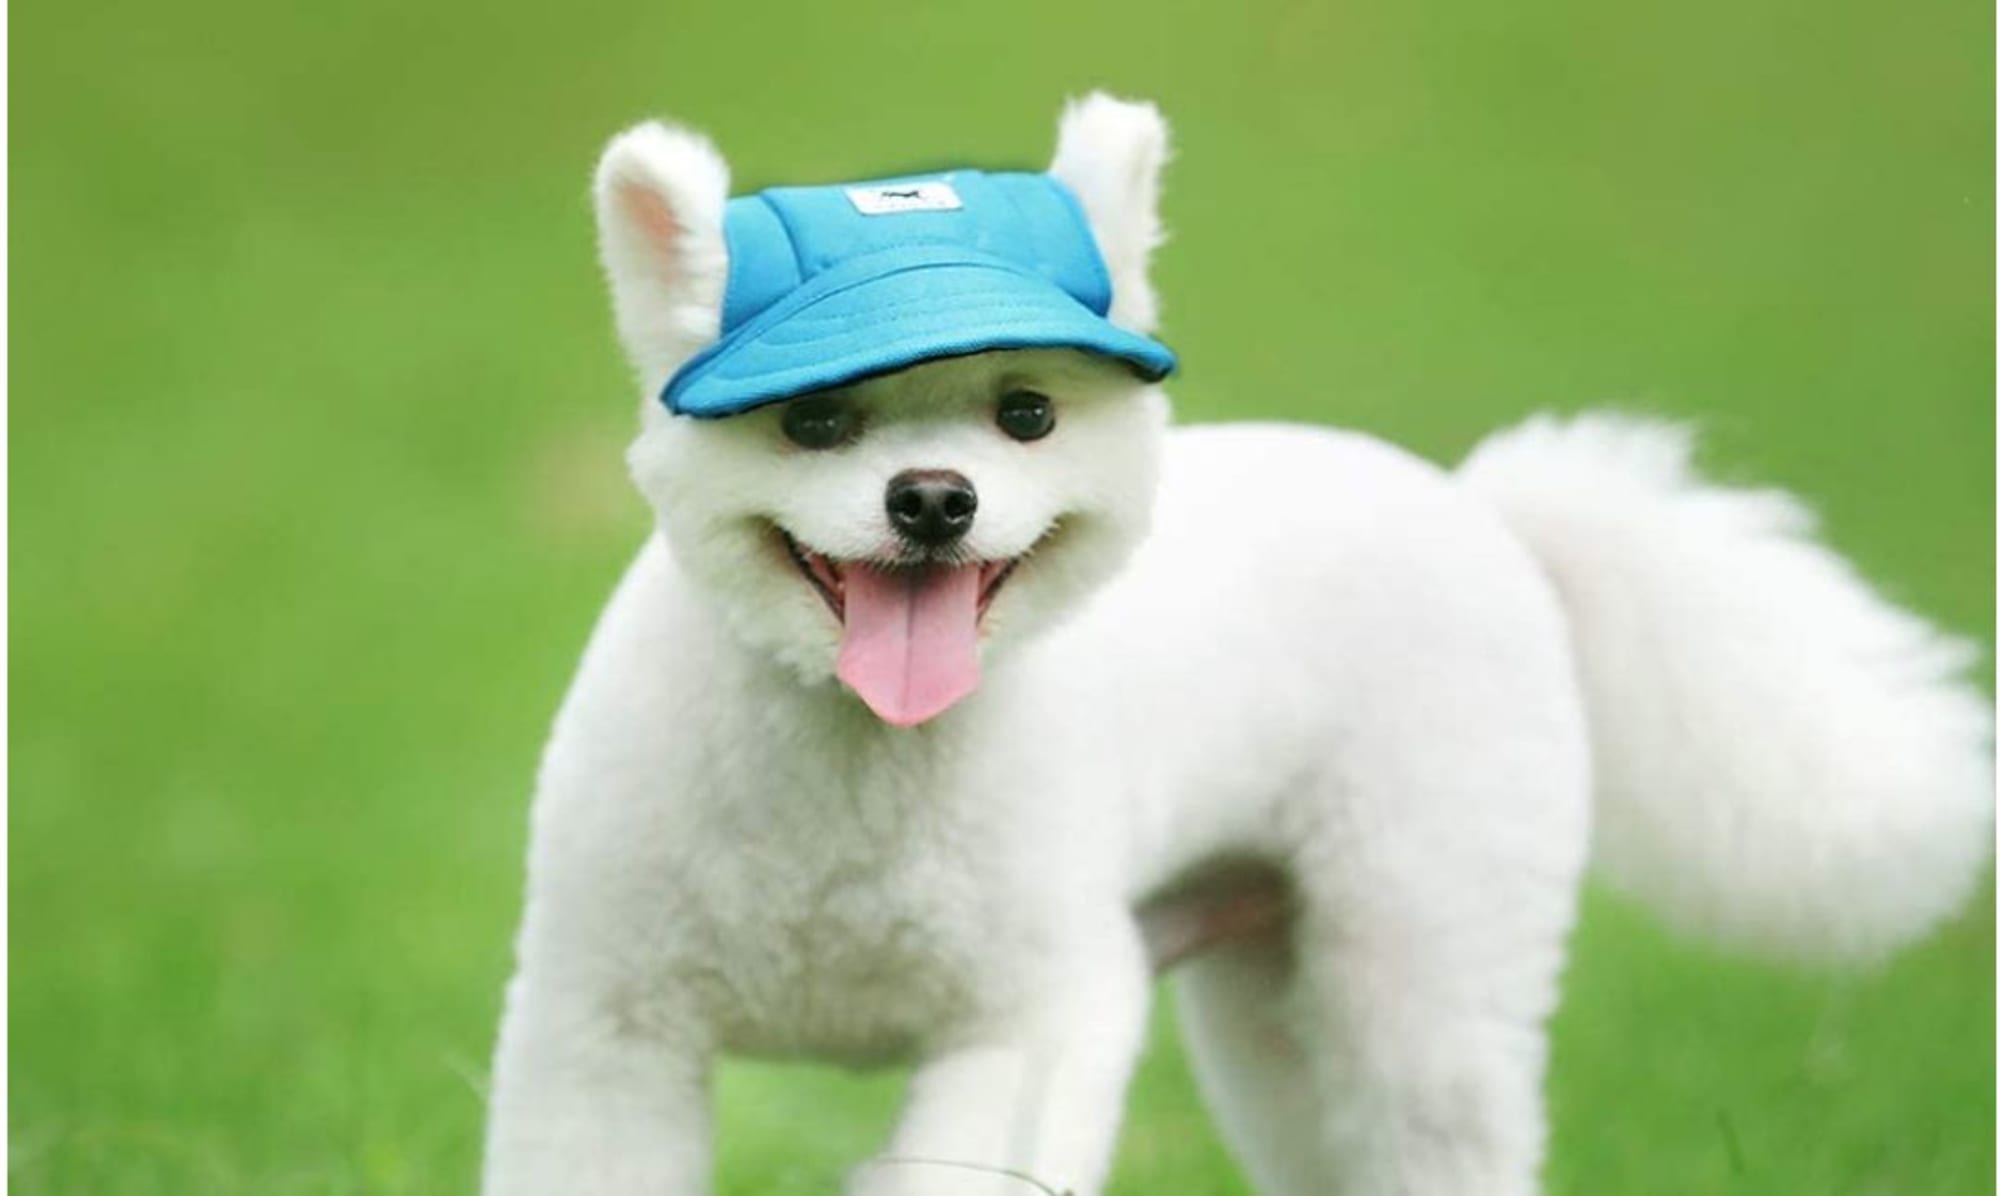 Protect Your Precious Pup From the Sun With Their Own Baseball Cap